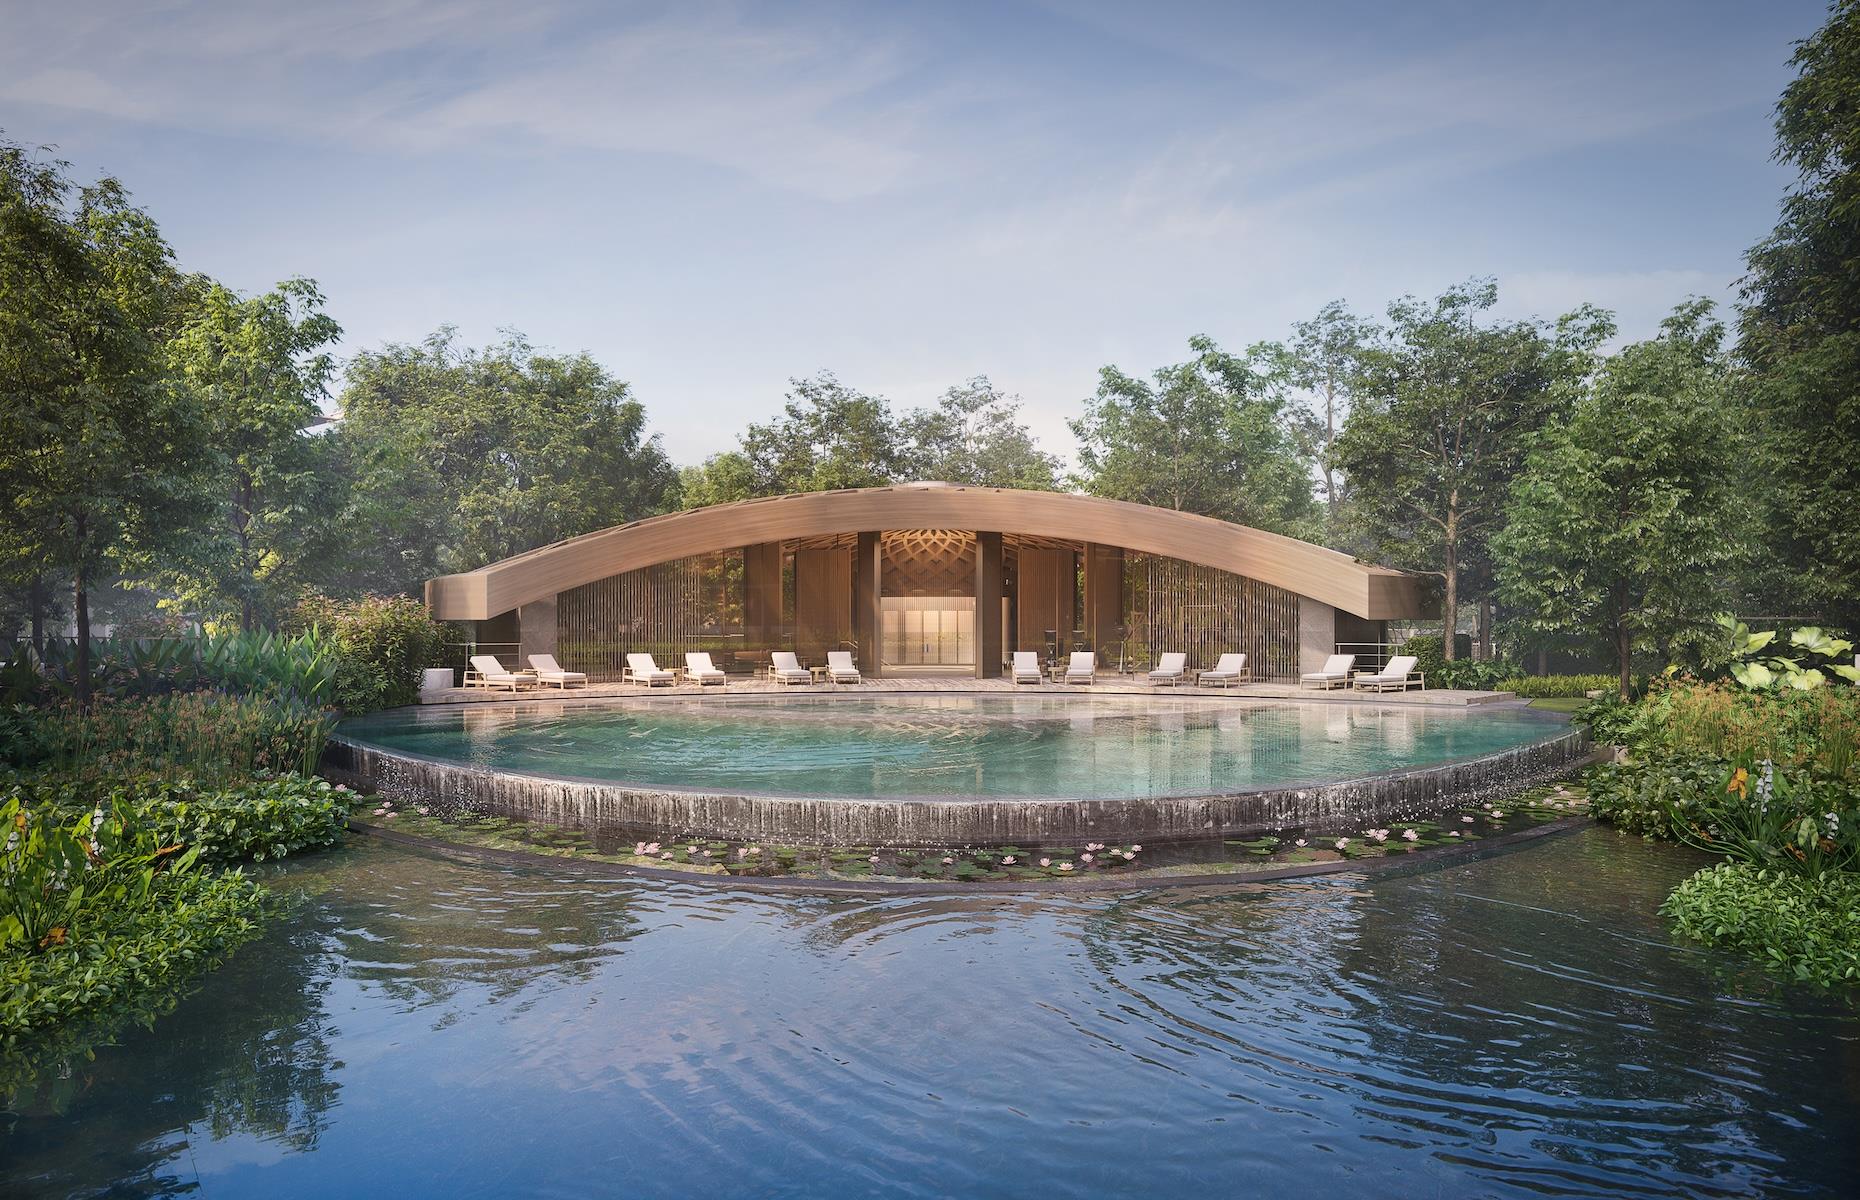 <p>Poised to open at the end of the year or the start of 2025 in a purpose-built forest close to bustling Bangkok, this leafy luxury escape from Six Senses is sure to make tree huggers swoon. With 60 guest rooms, 27 residences, restaurants and a co-working space, Six Senses The Forestias will be centred around a woodland lagoon. Wellbeing and nature are central to the design, which aims to have a “therapeutic and calming effect” on guests. Along with the latest health and wellness facilities, its forested grounds will be laced with trails.</p>  <p><a href="https://www.loveexploring.com/galleries/106430/the-worlds-most-expensive-hotel-suites"><strong>Now check out the world's most expensive hotel suites</strong></a></p>